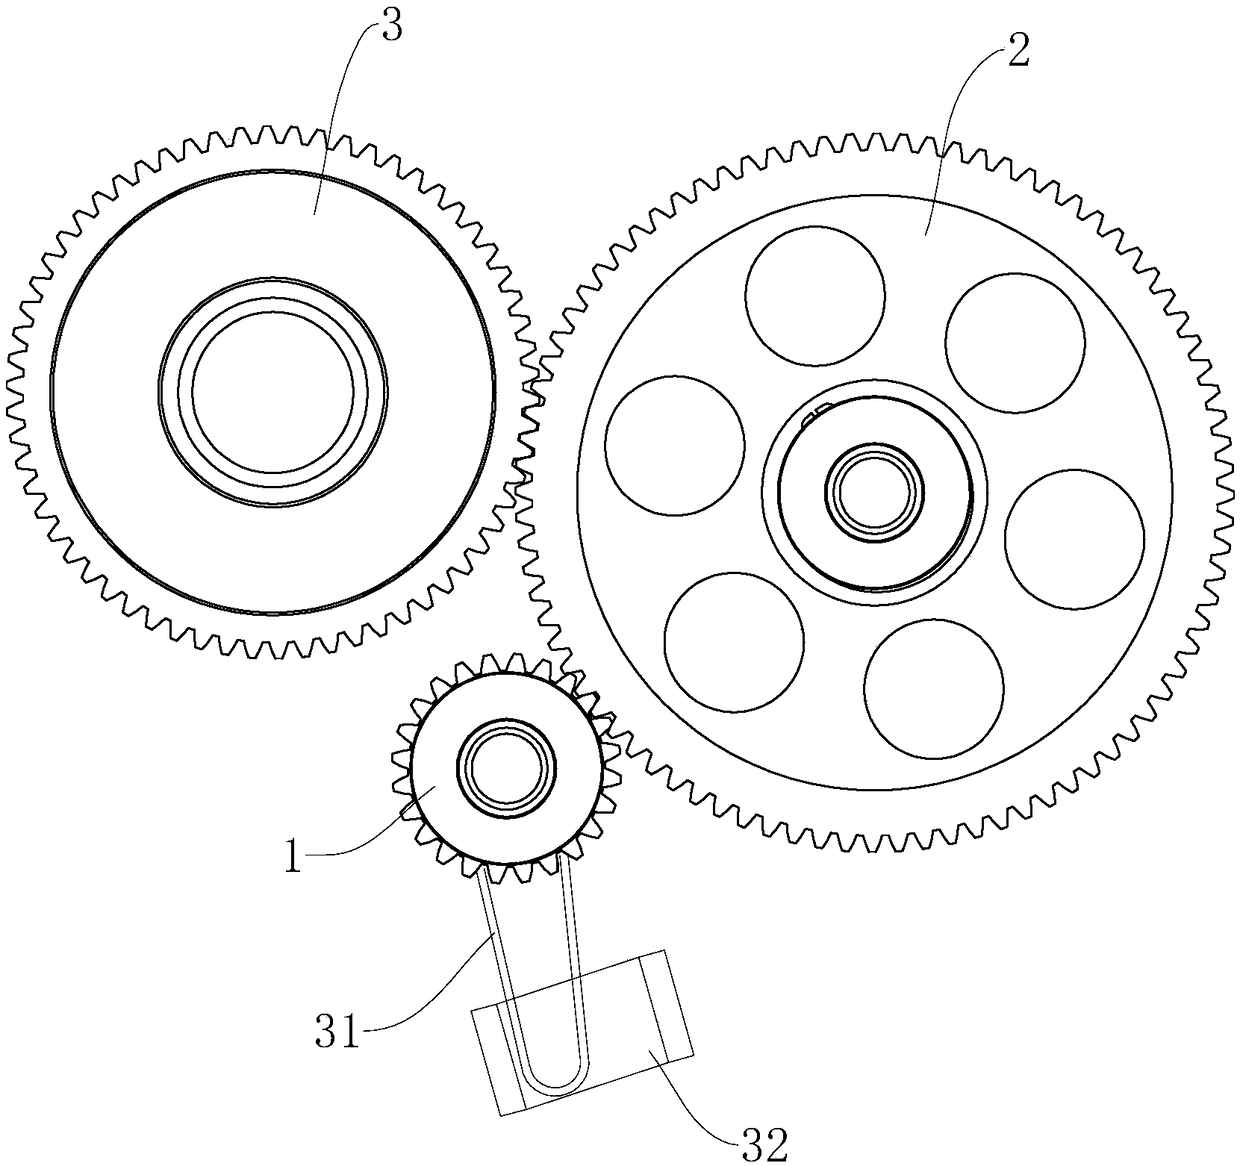 Two-gear speed change mechanism of electric motorcycle